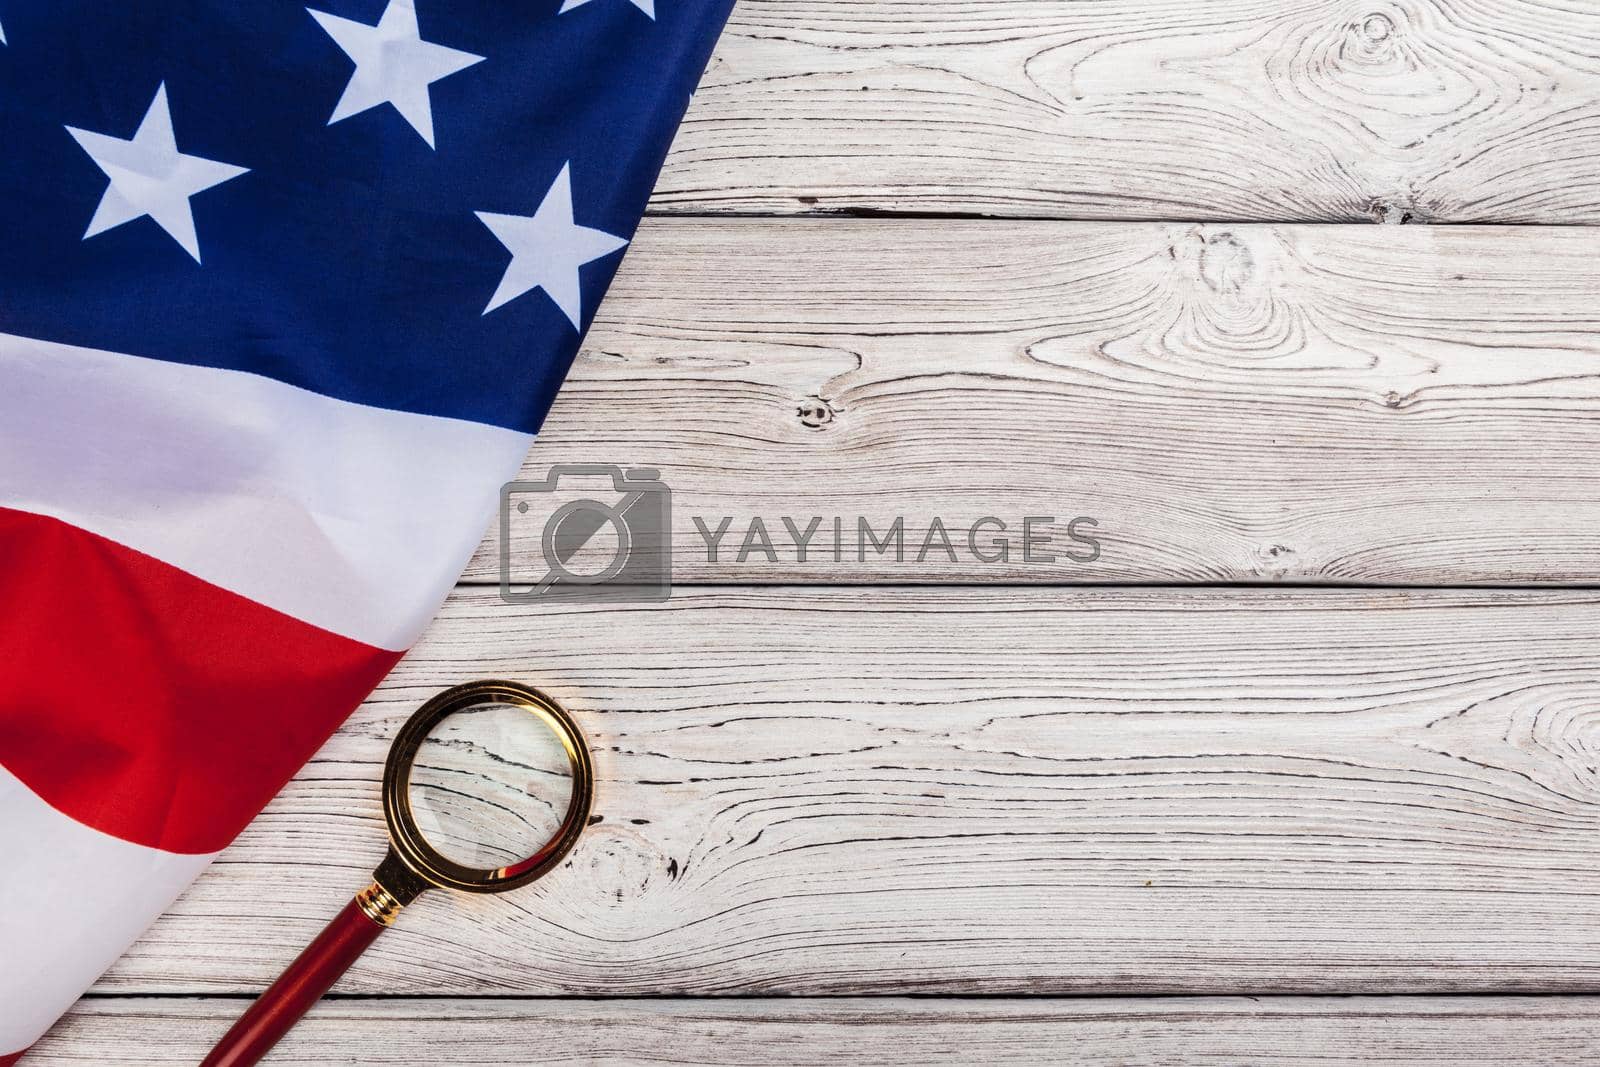 Royalty free image of Flag of USA and a magnifying glass by Fabrikasimf